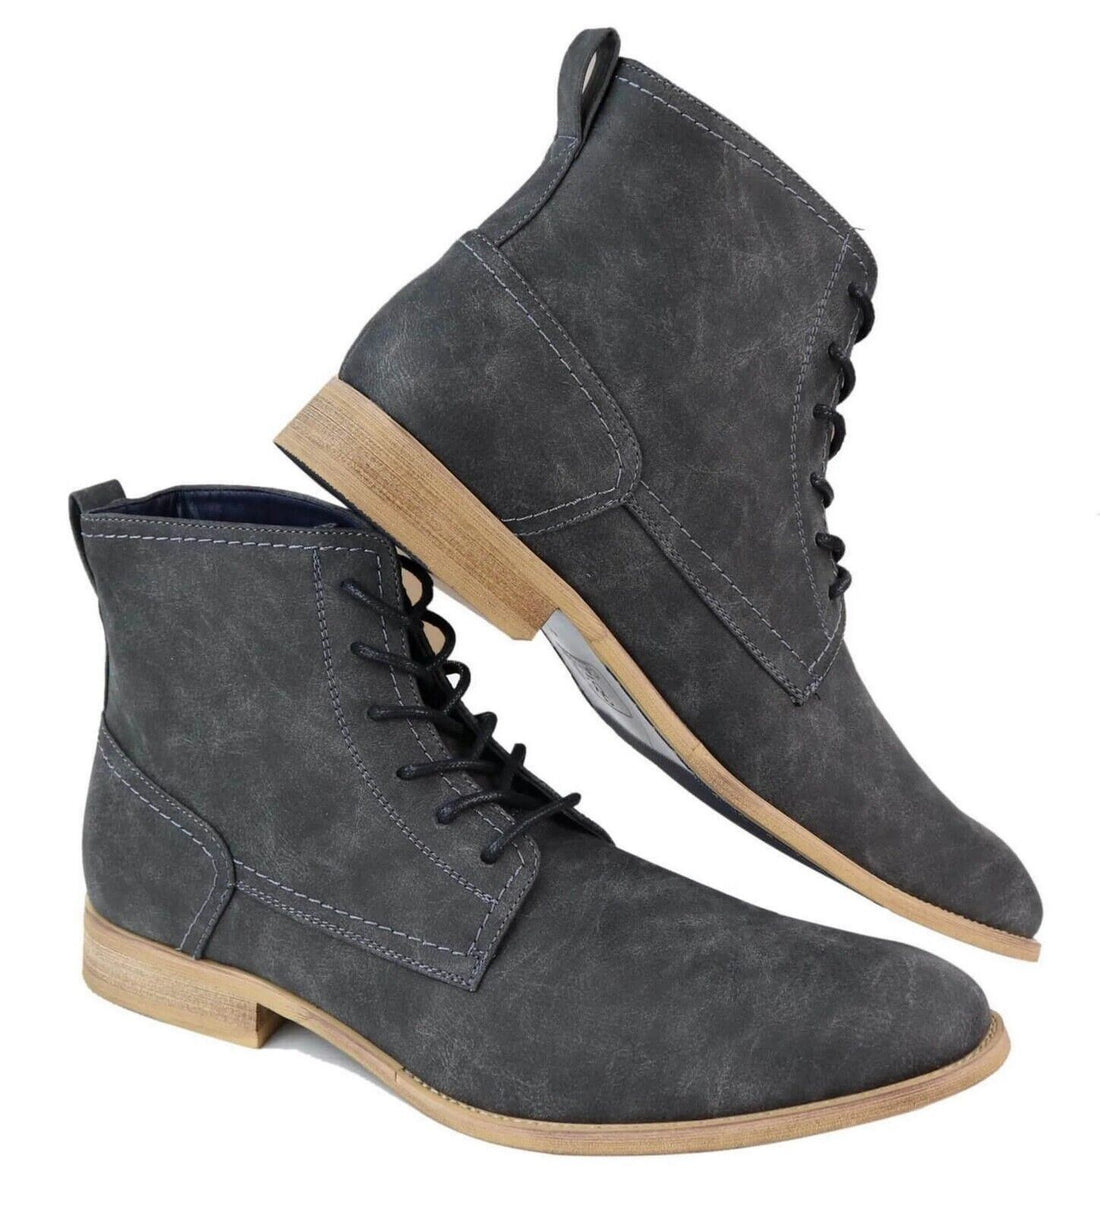 Mens Matt Grey Suede Lace Up Ankle Boots - Upperclass Fashions 